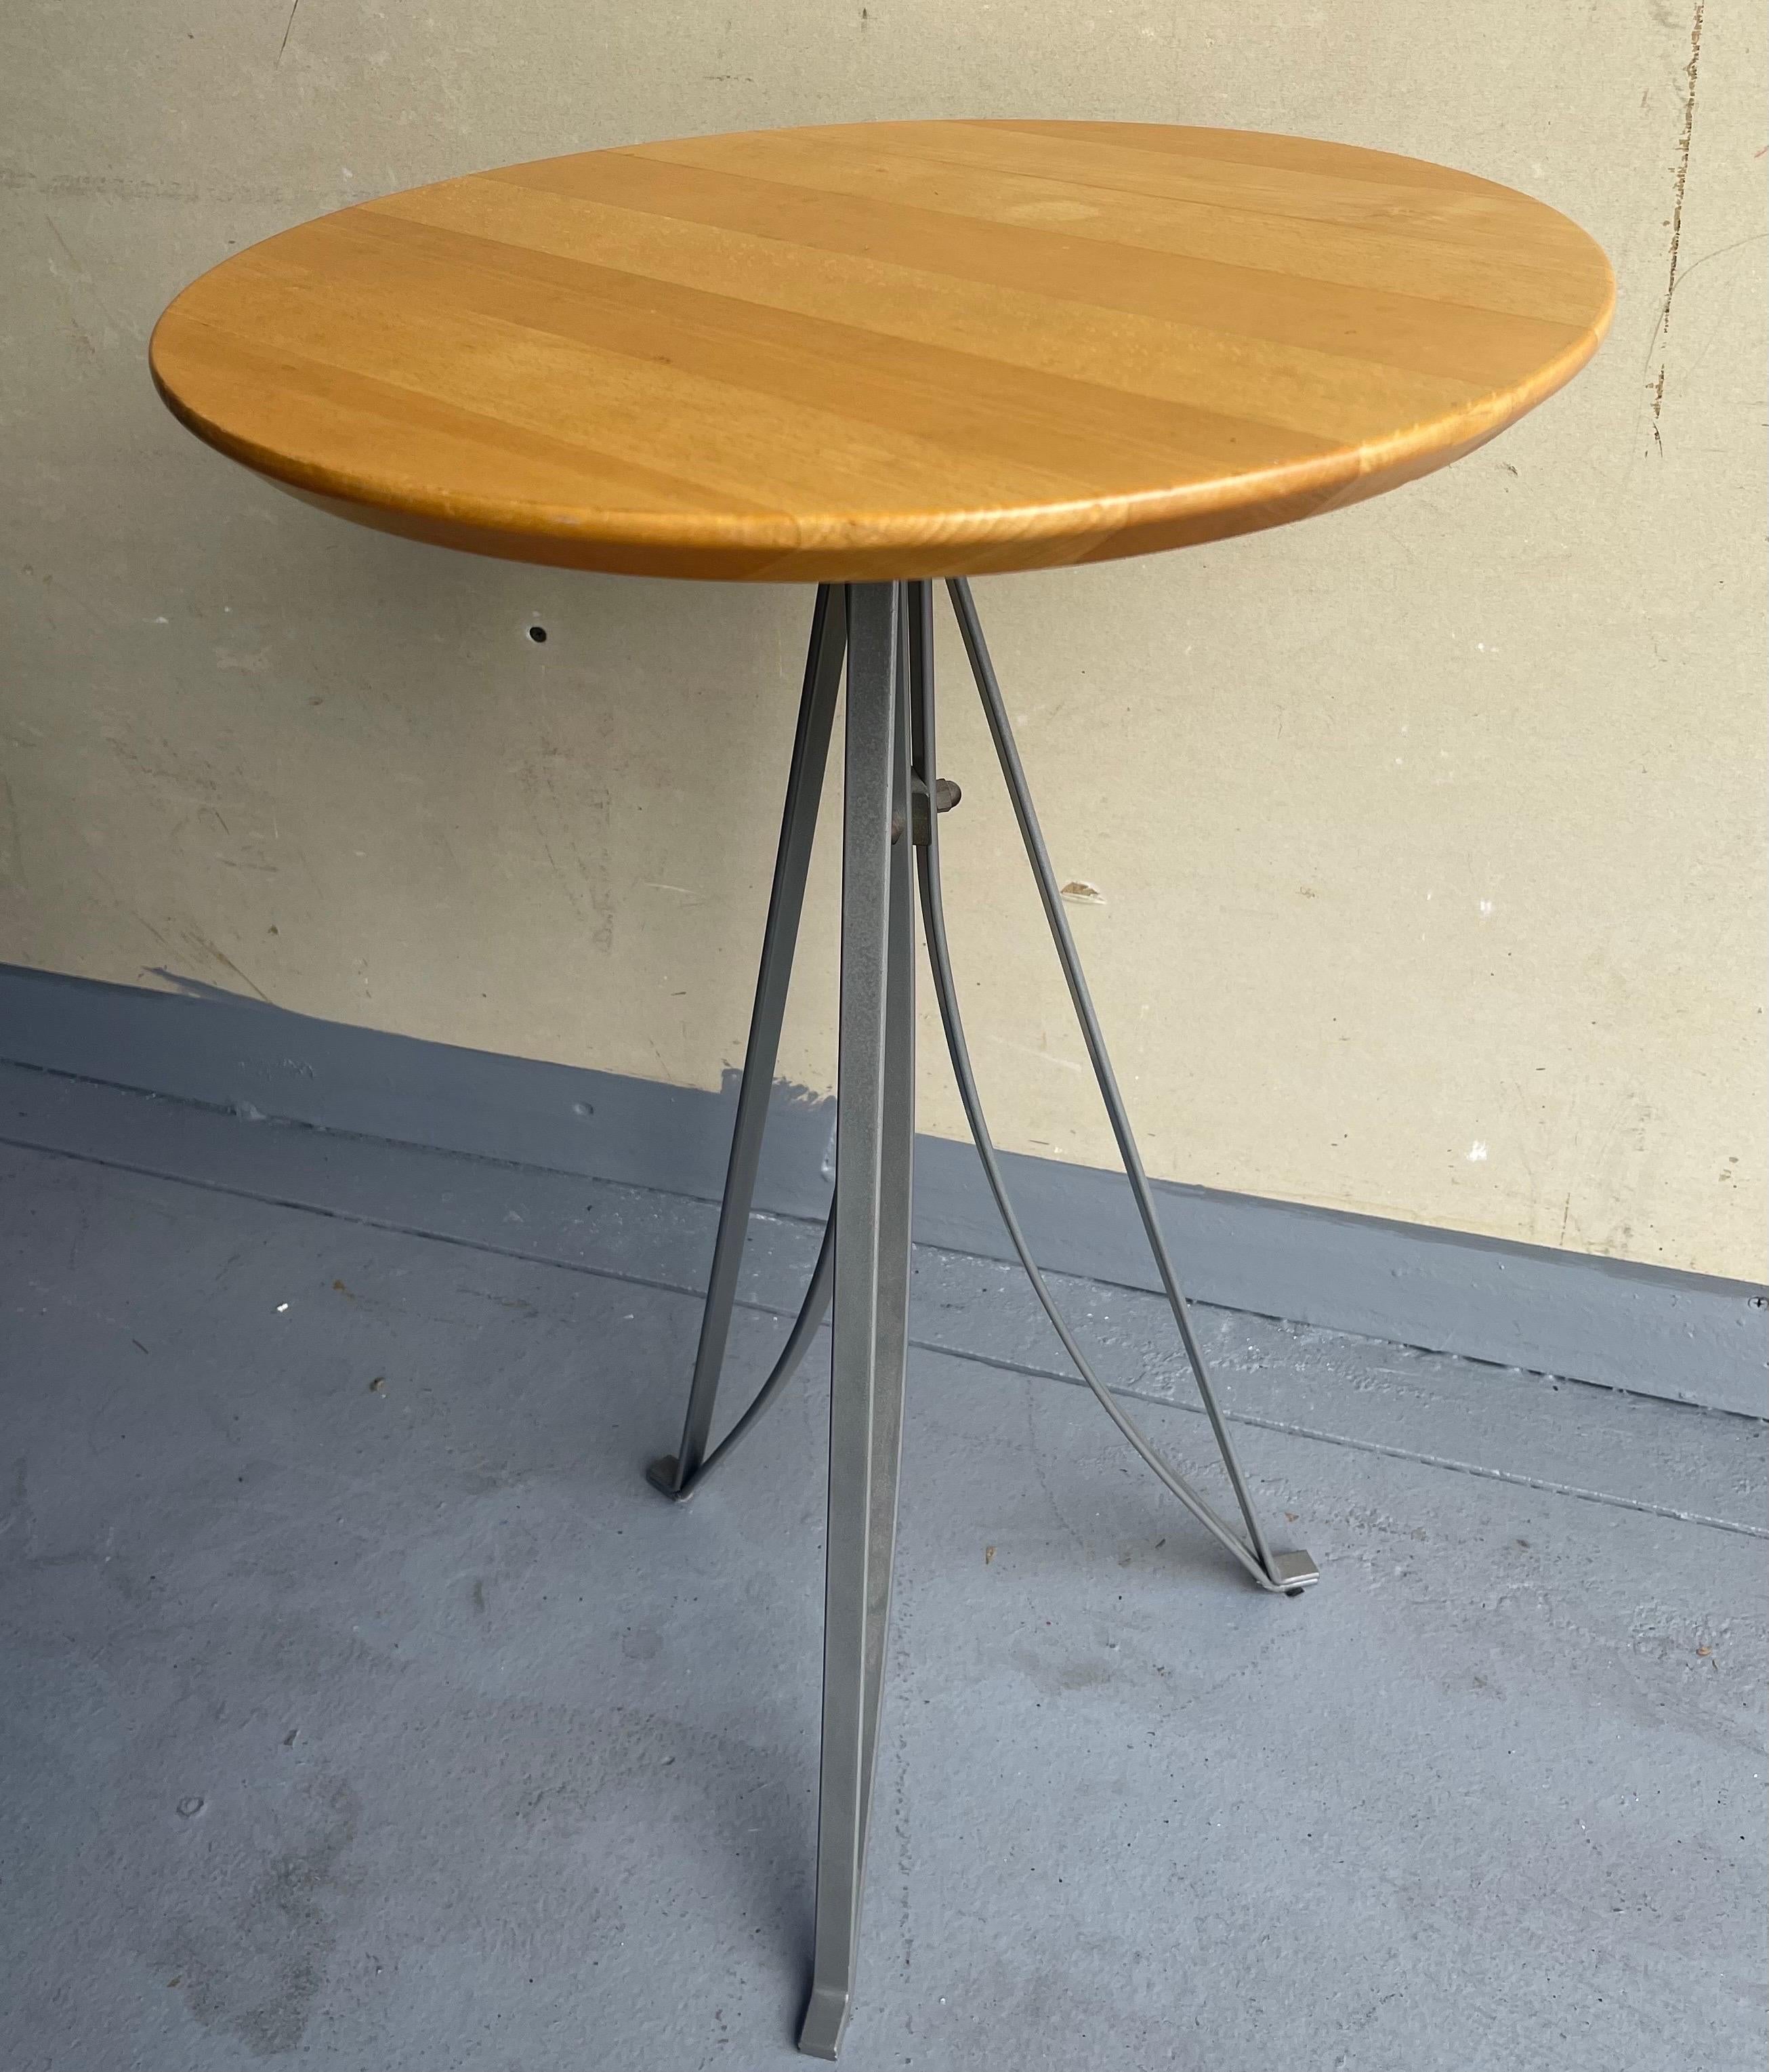 A very cool vintage Industrial side table with maple top and steel legs, circa 1980s. The table is in very good vintage condition and measures 24